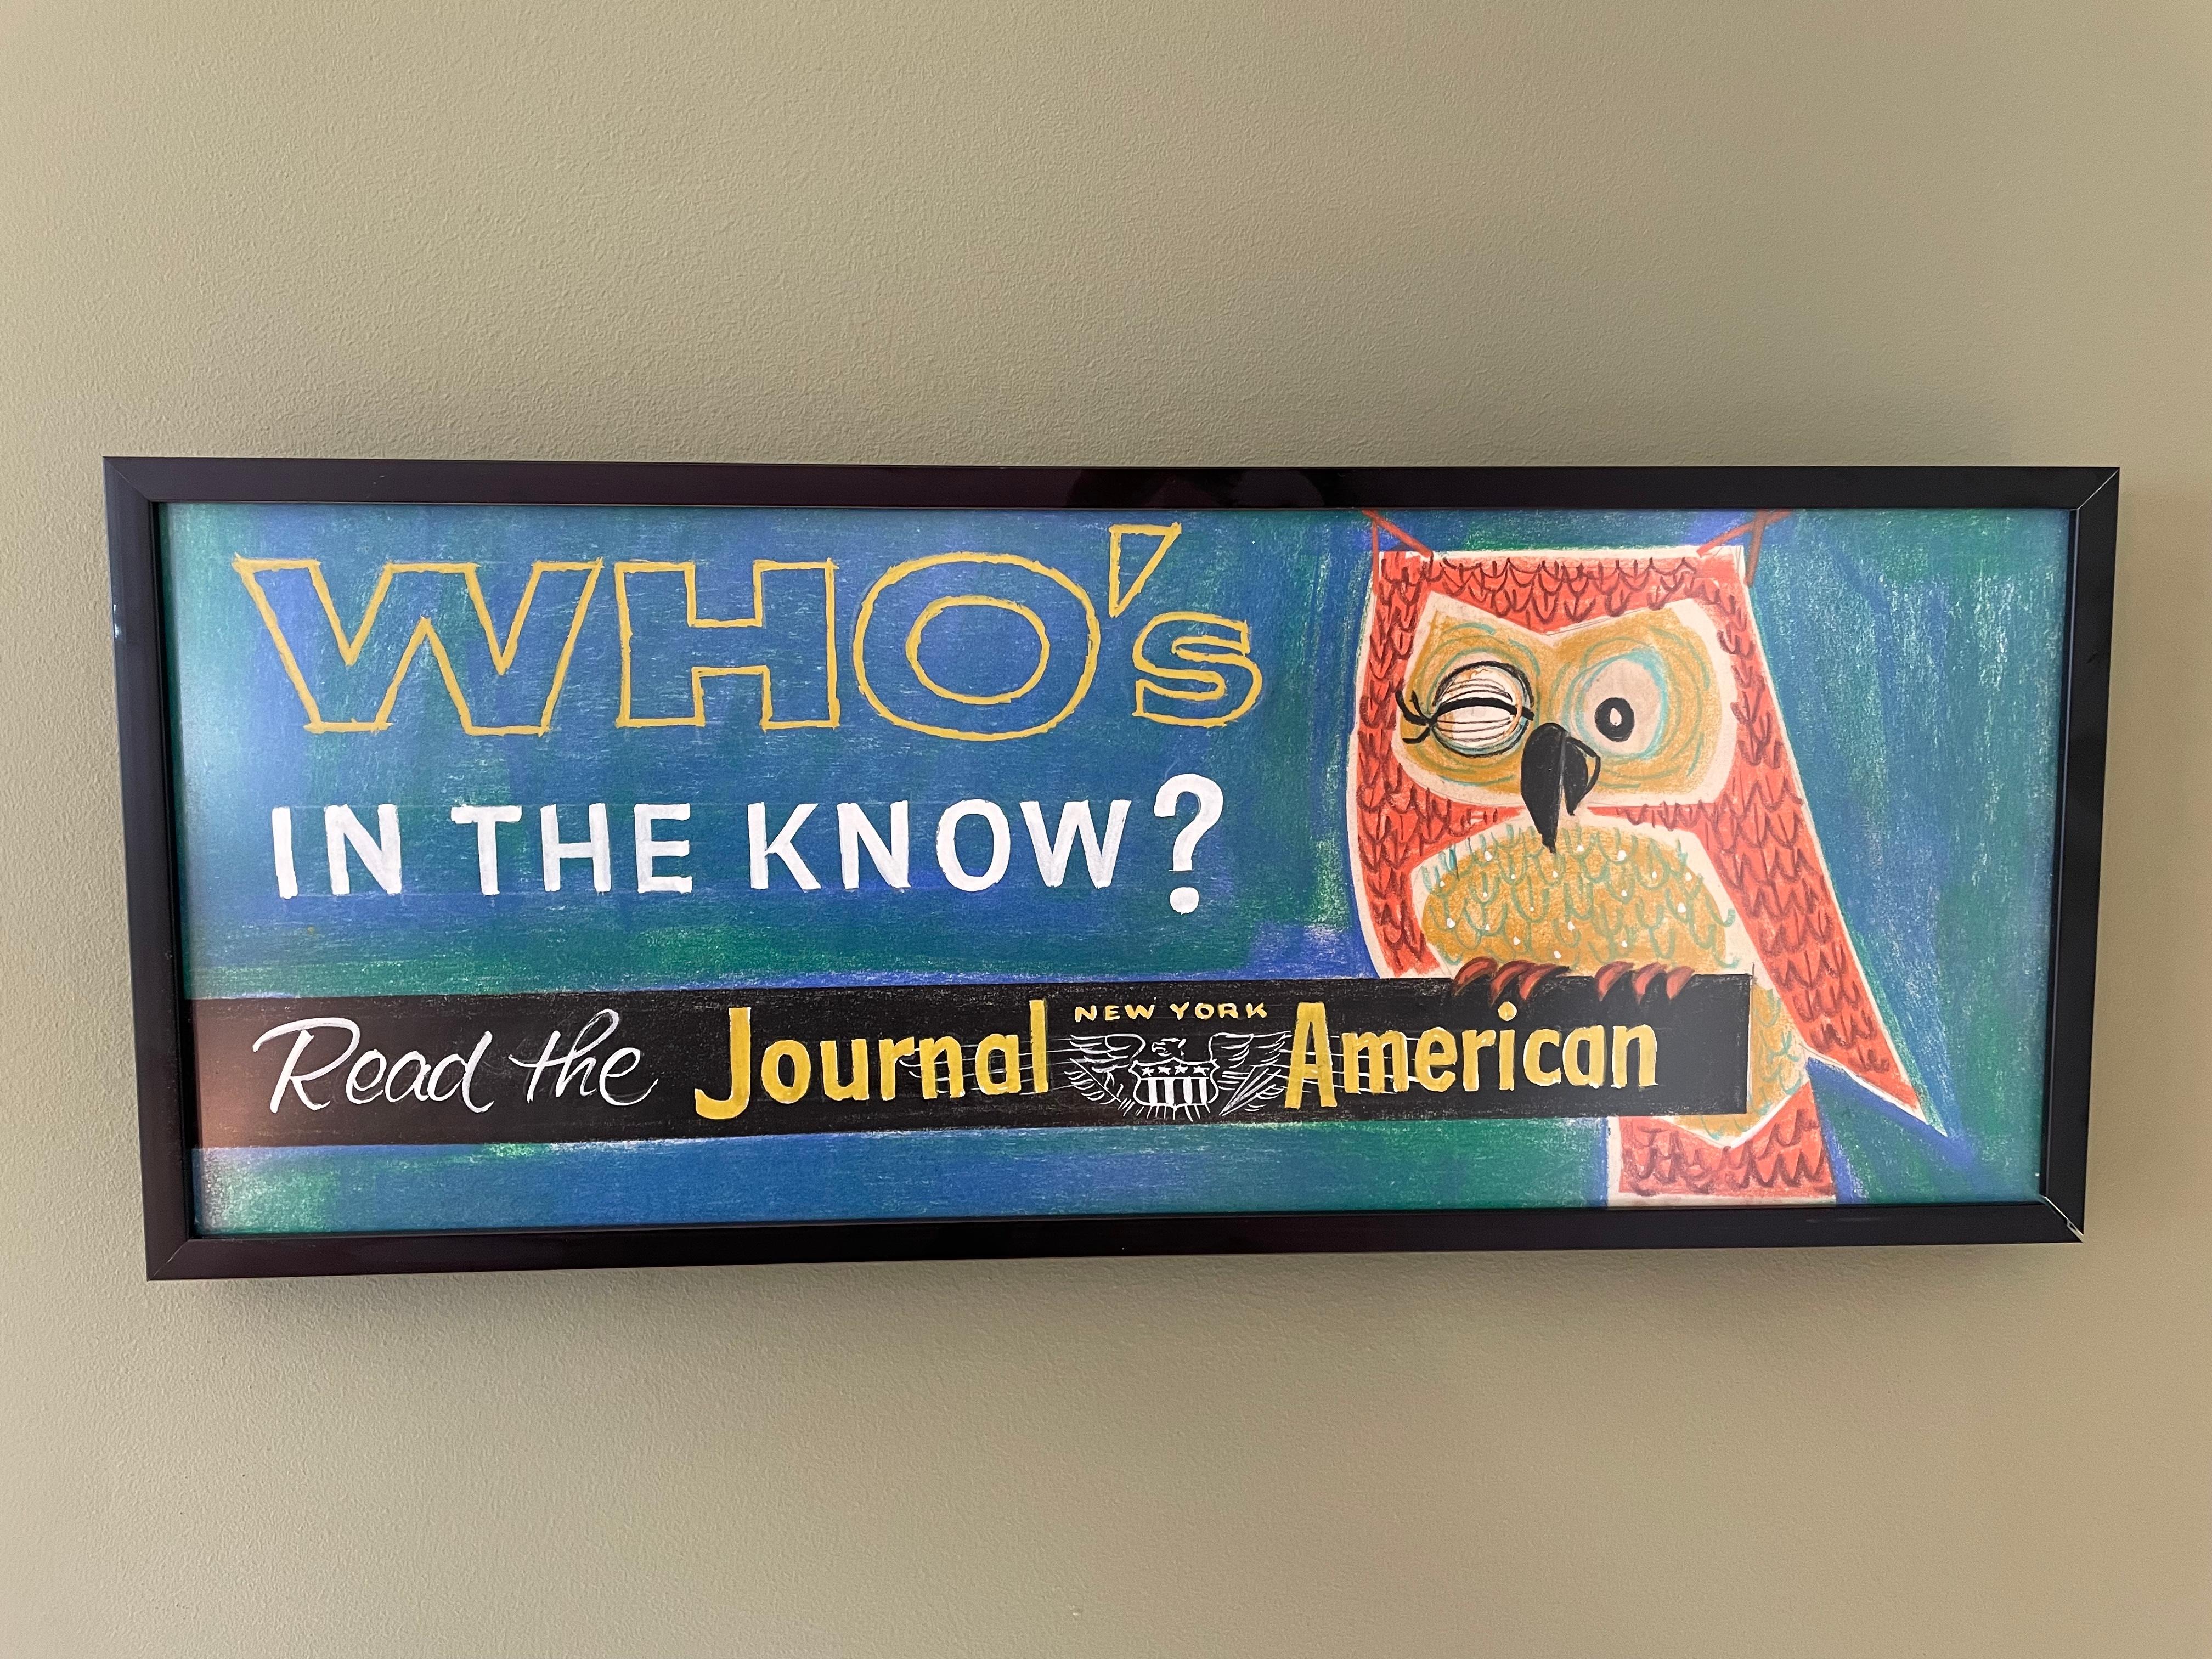 Fantastic find! Believed to be a one-of-a-kind maquette, this was possibly a billboard work up for the New York Journal American. Closed in the 1966, the newspaper was known for color and this piece is right on point. Gorgeous shades of blues and